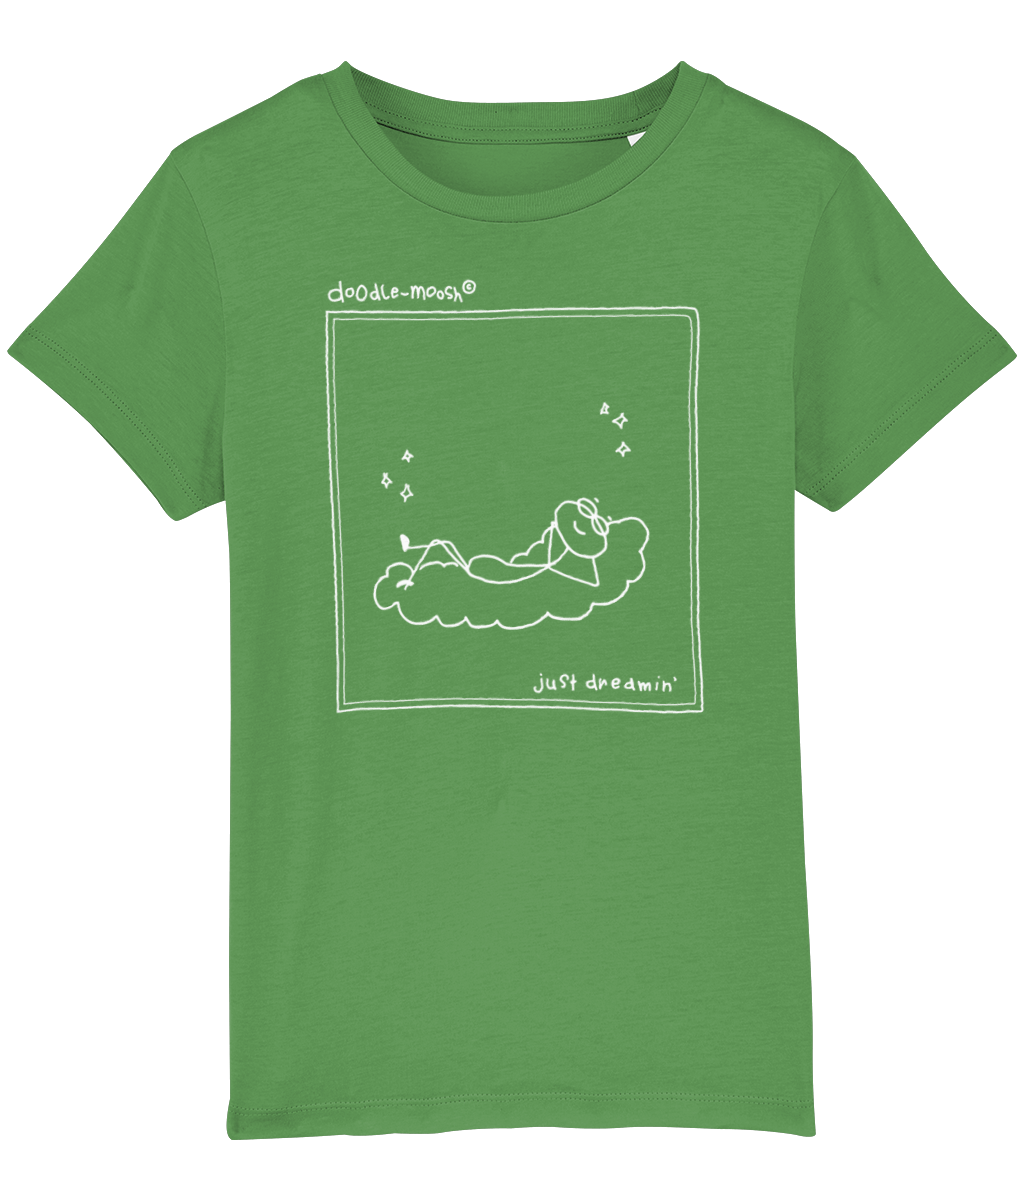 Just dreaming t-shirt, green with white